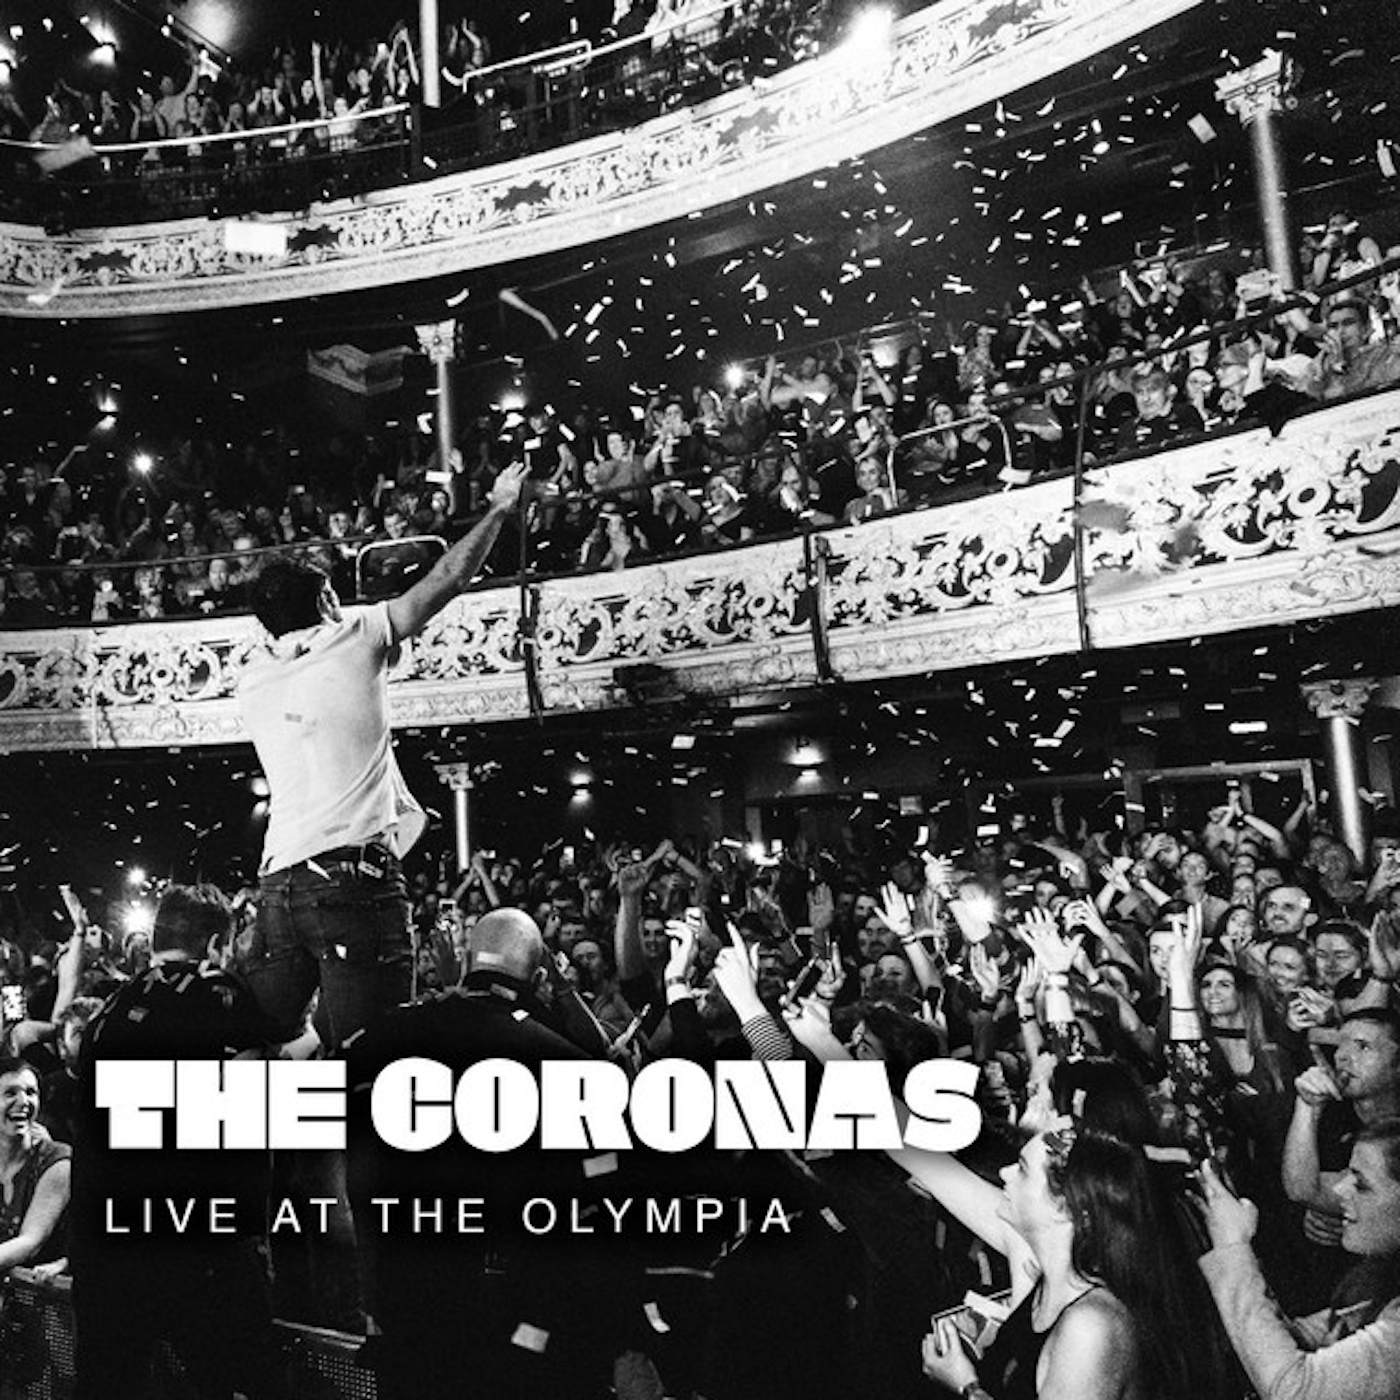 The Coronas LIVE AT THE OLYMPIA CD